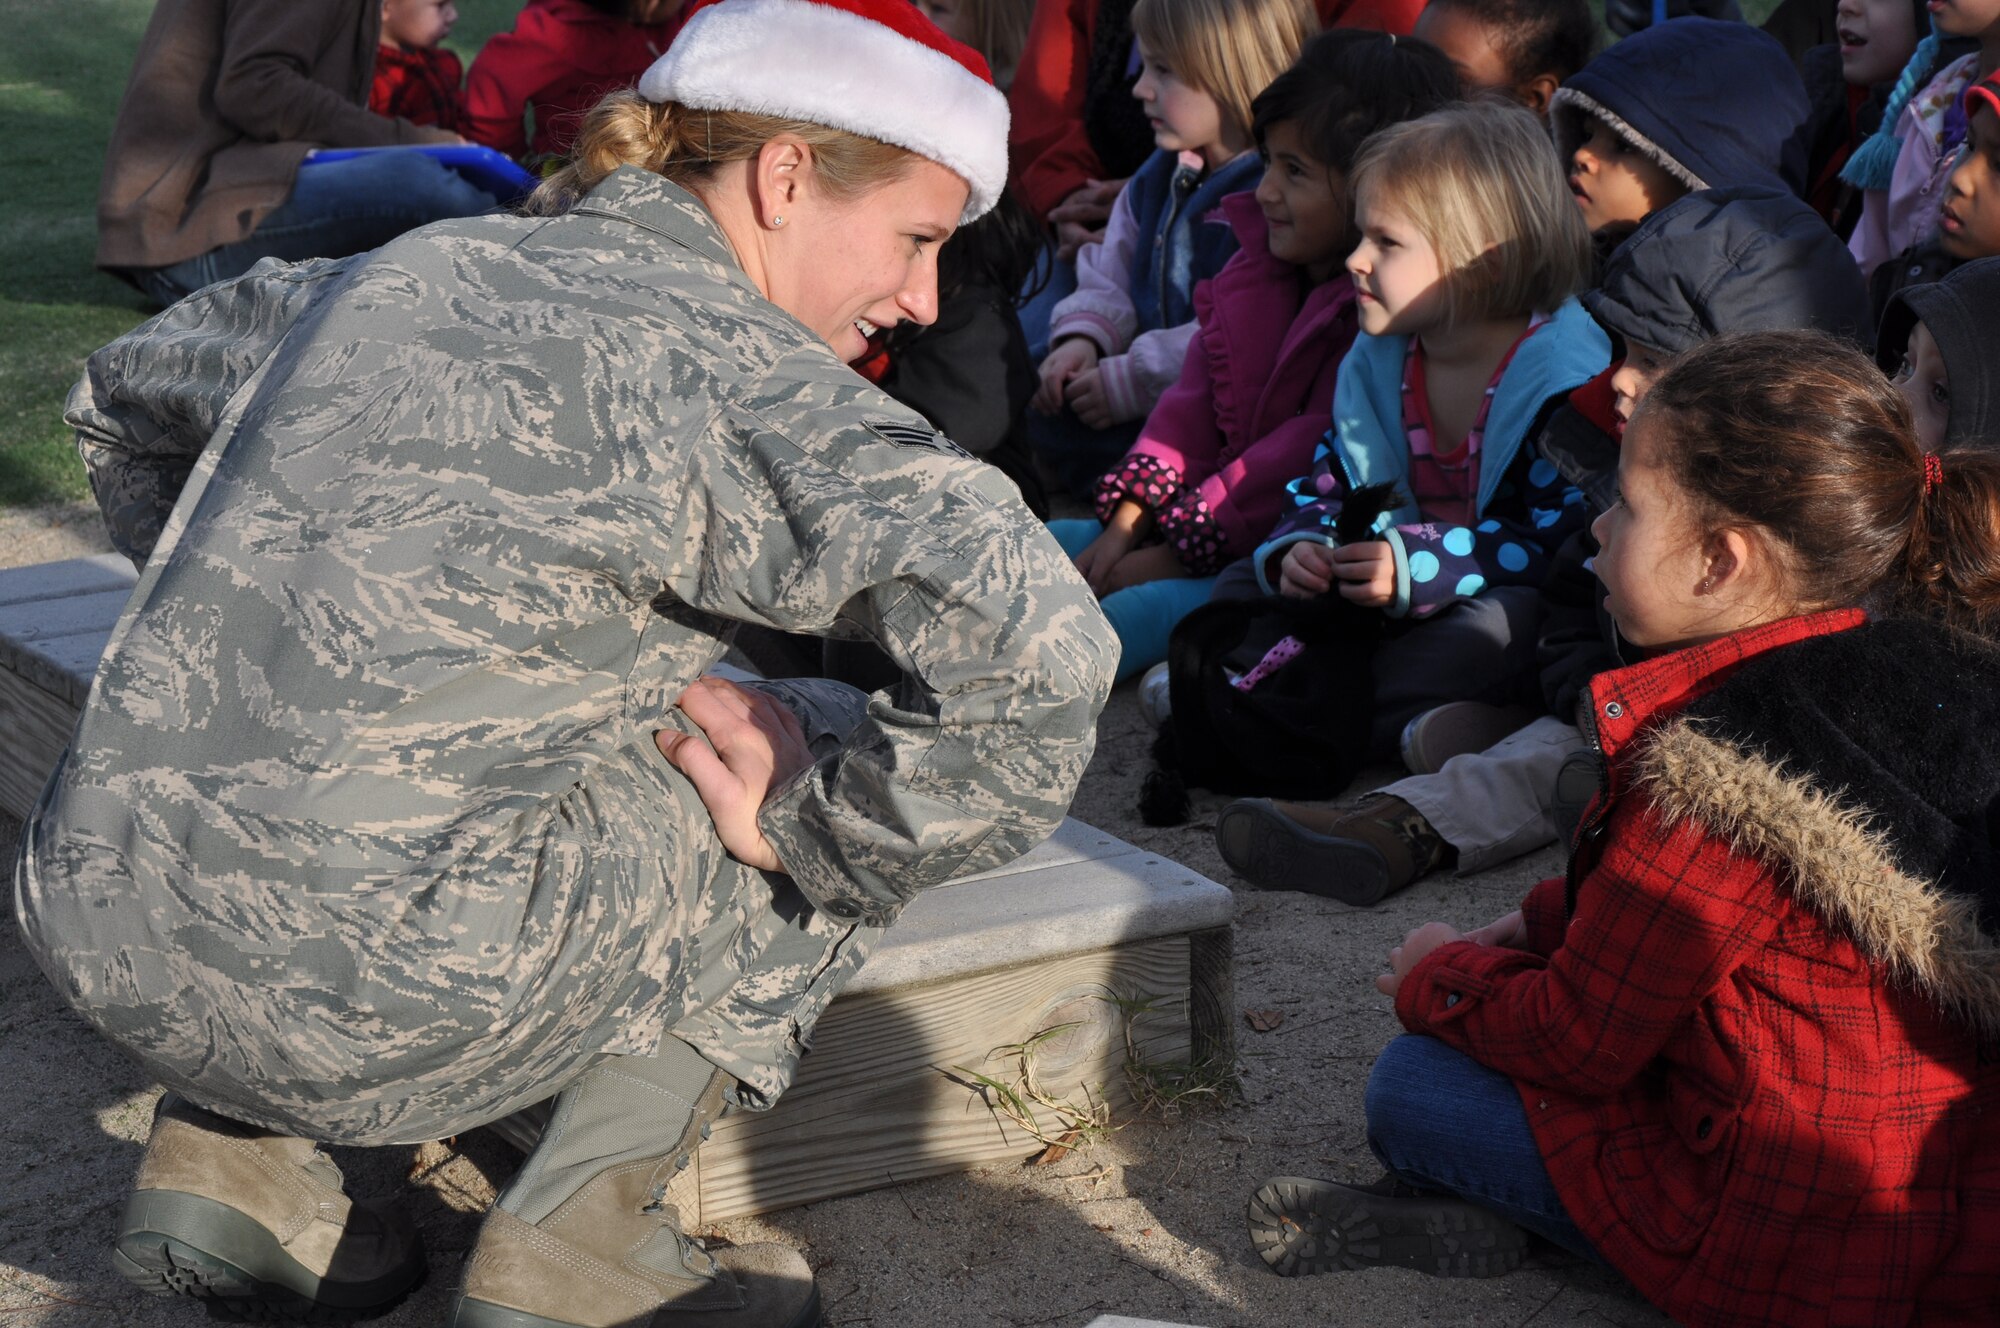 Senior Airman Megan Hokaj greets a young fan after a holiday show at the Child Development Center at Beale Air Force Base Calif., Dec. 14 2011. Hokaj is a member of the band Mobility based at Travis AFB. (U.S. Air Force photo by Staff Sgt. Robert M. Trujillo/Released)